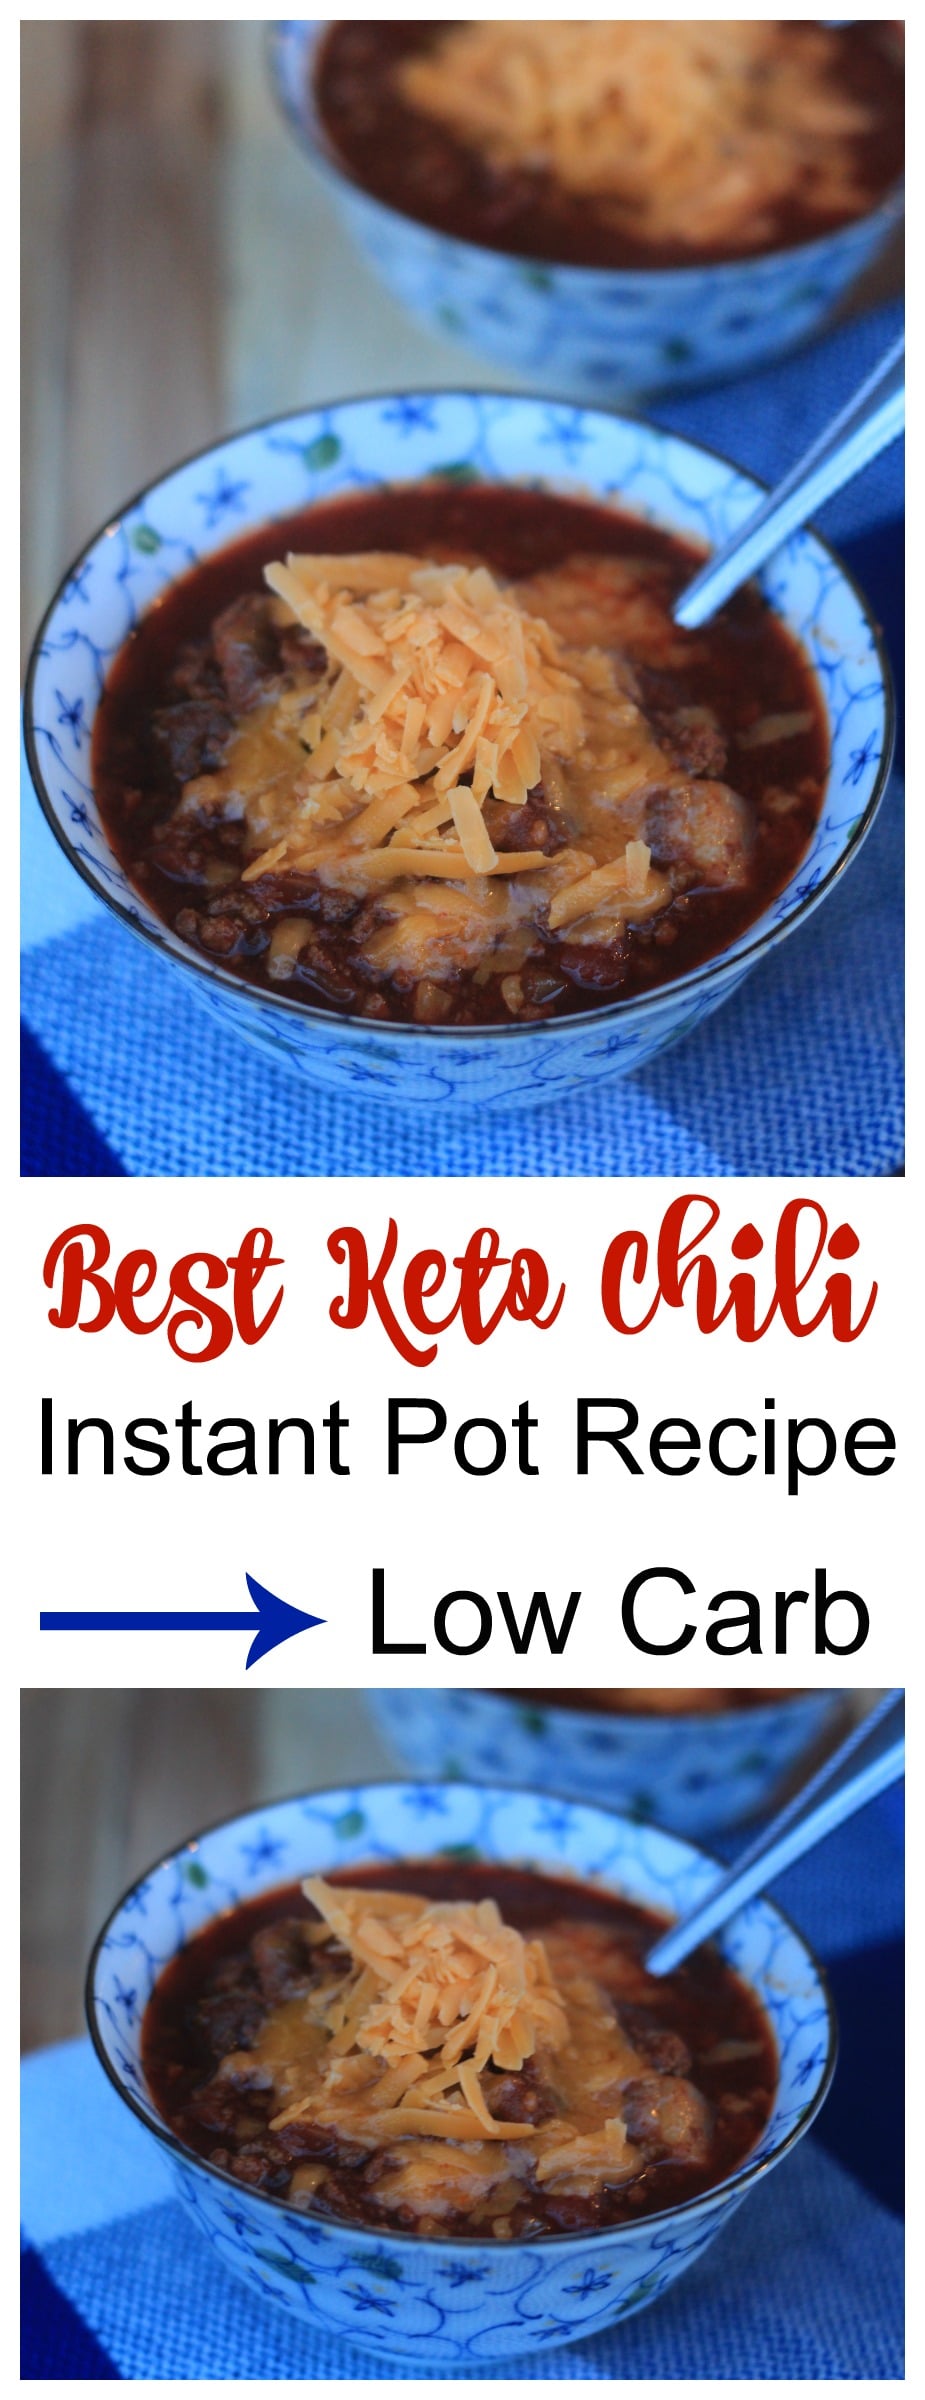 Make our Keto Chili Recipe as a great comfort food recipe that everyone in the house will love! Top with your favorite cheddar for a hearty meal that is low carb friendly.